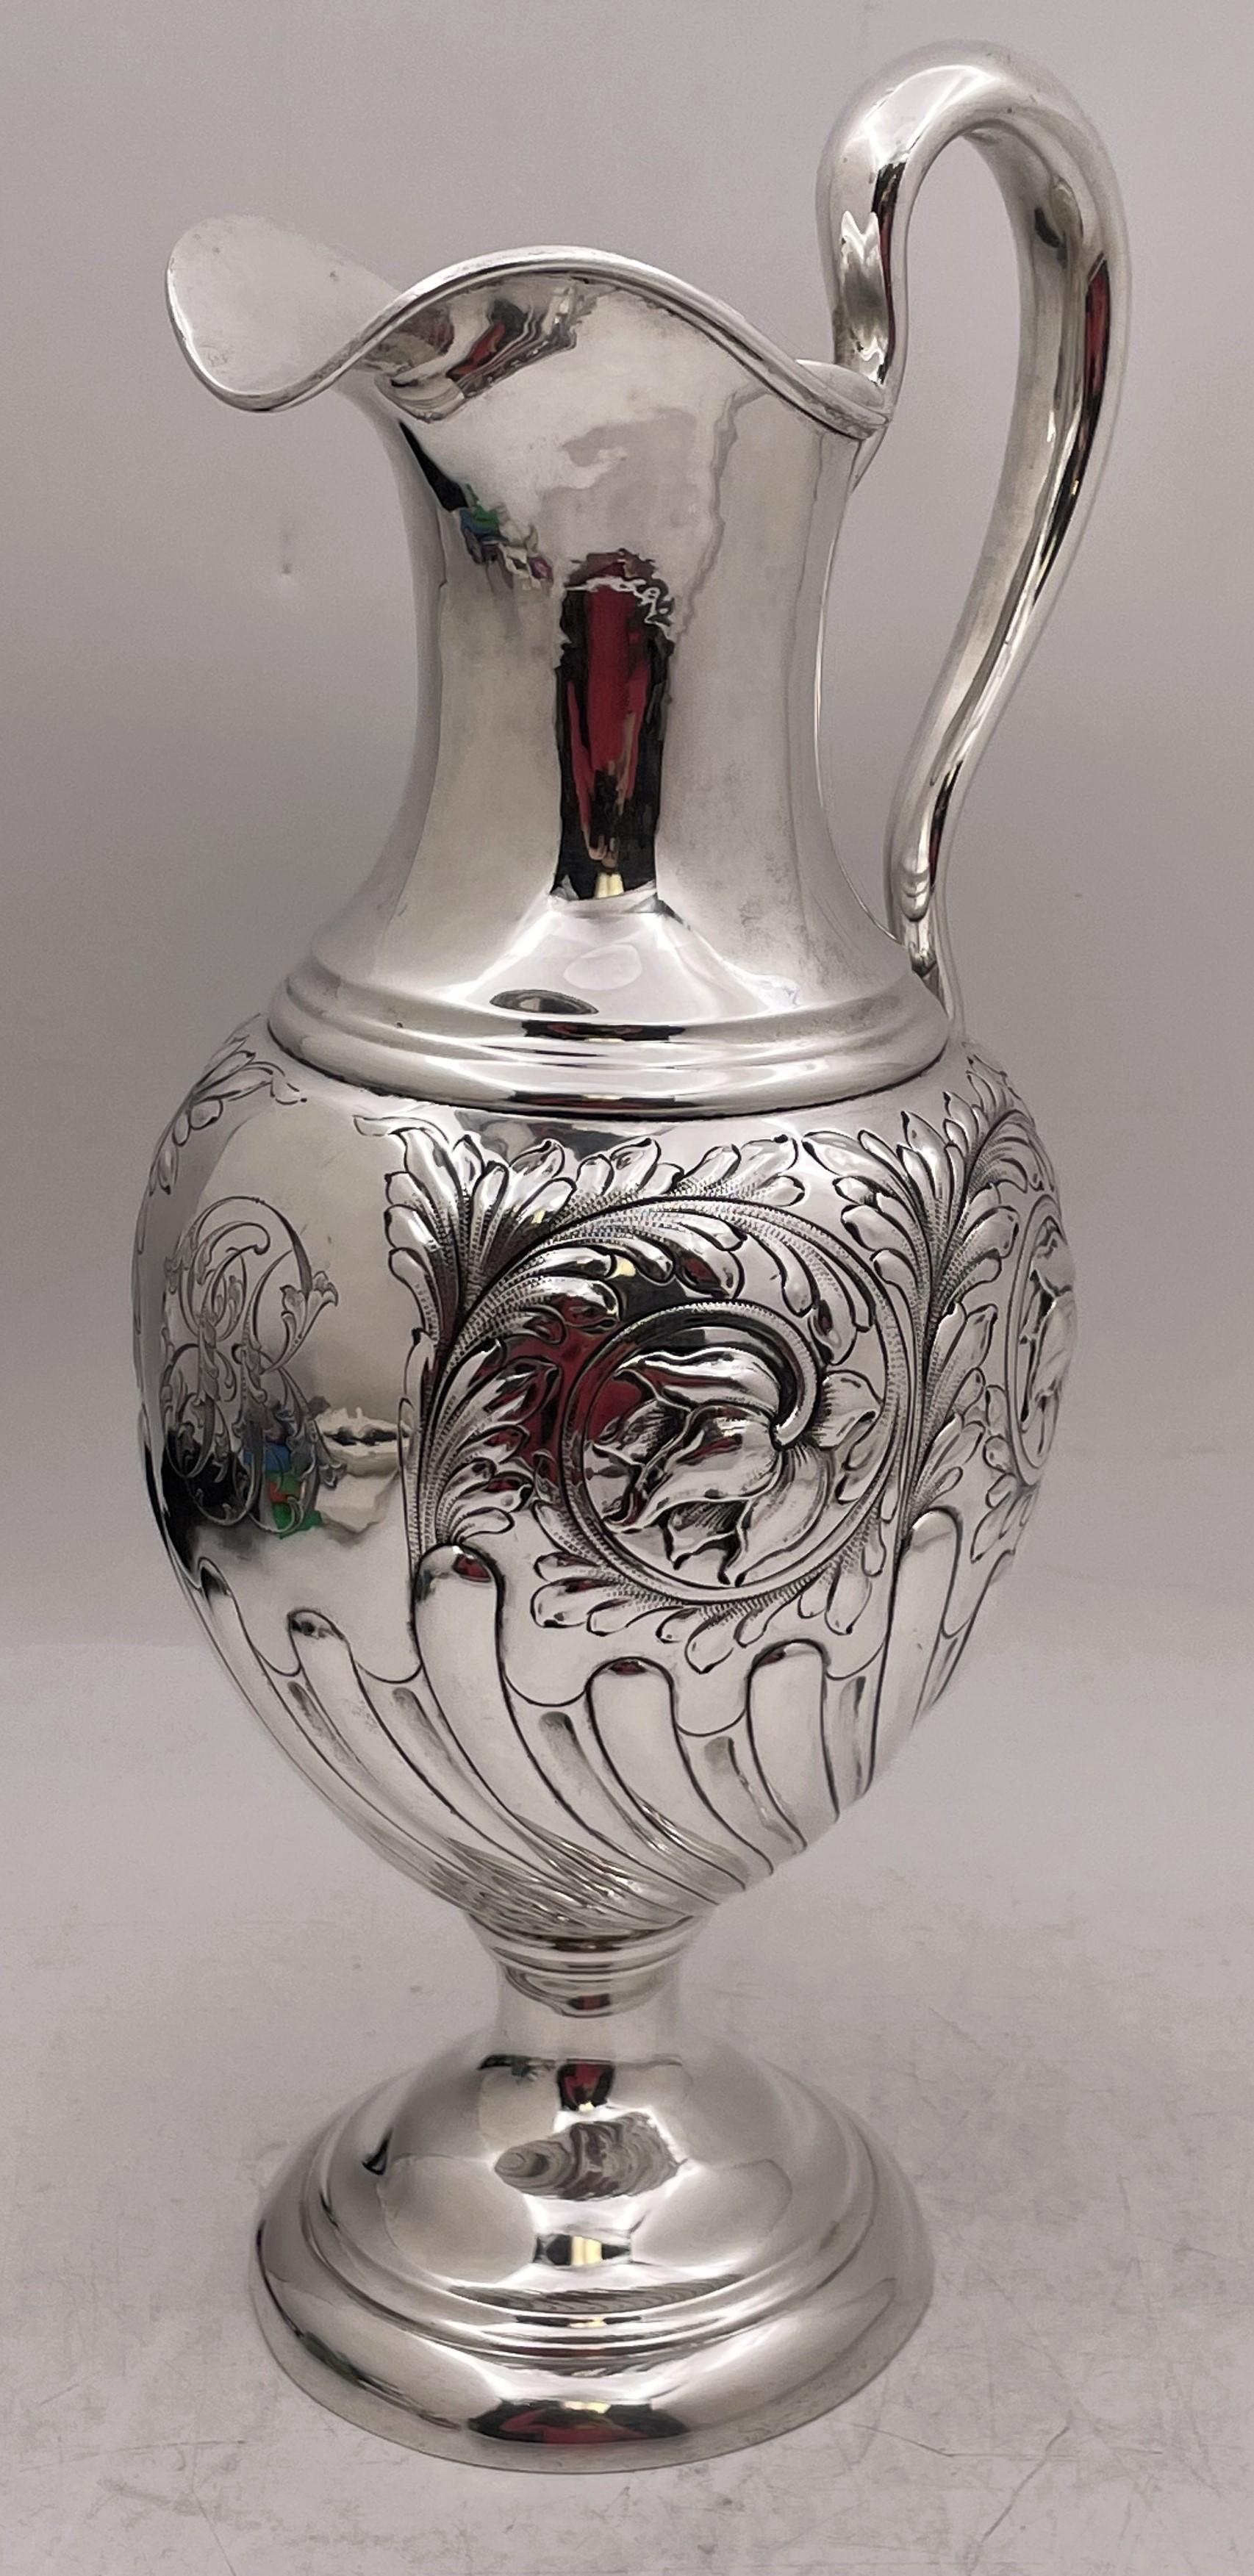 Lebkuecher sterling silver pitcher in Art Nouveau style from the late 19th or early 20th century with raised floral motifs and stylized, fluted motifs adorning the body. It measures 14 5/8'' in height by 7 1/8'' from handle to spout, weighs 27.5